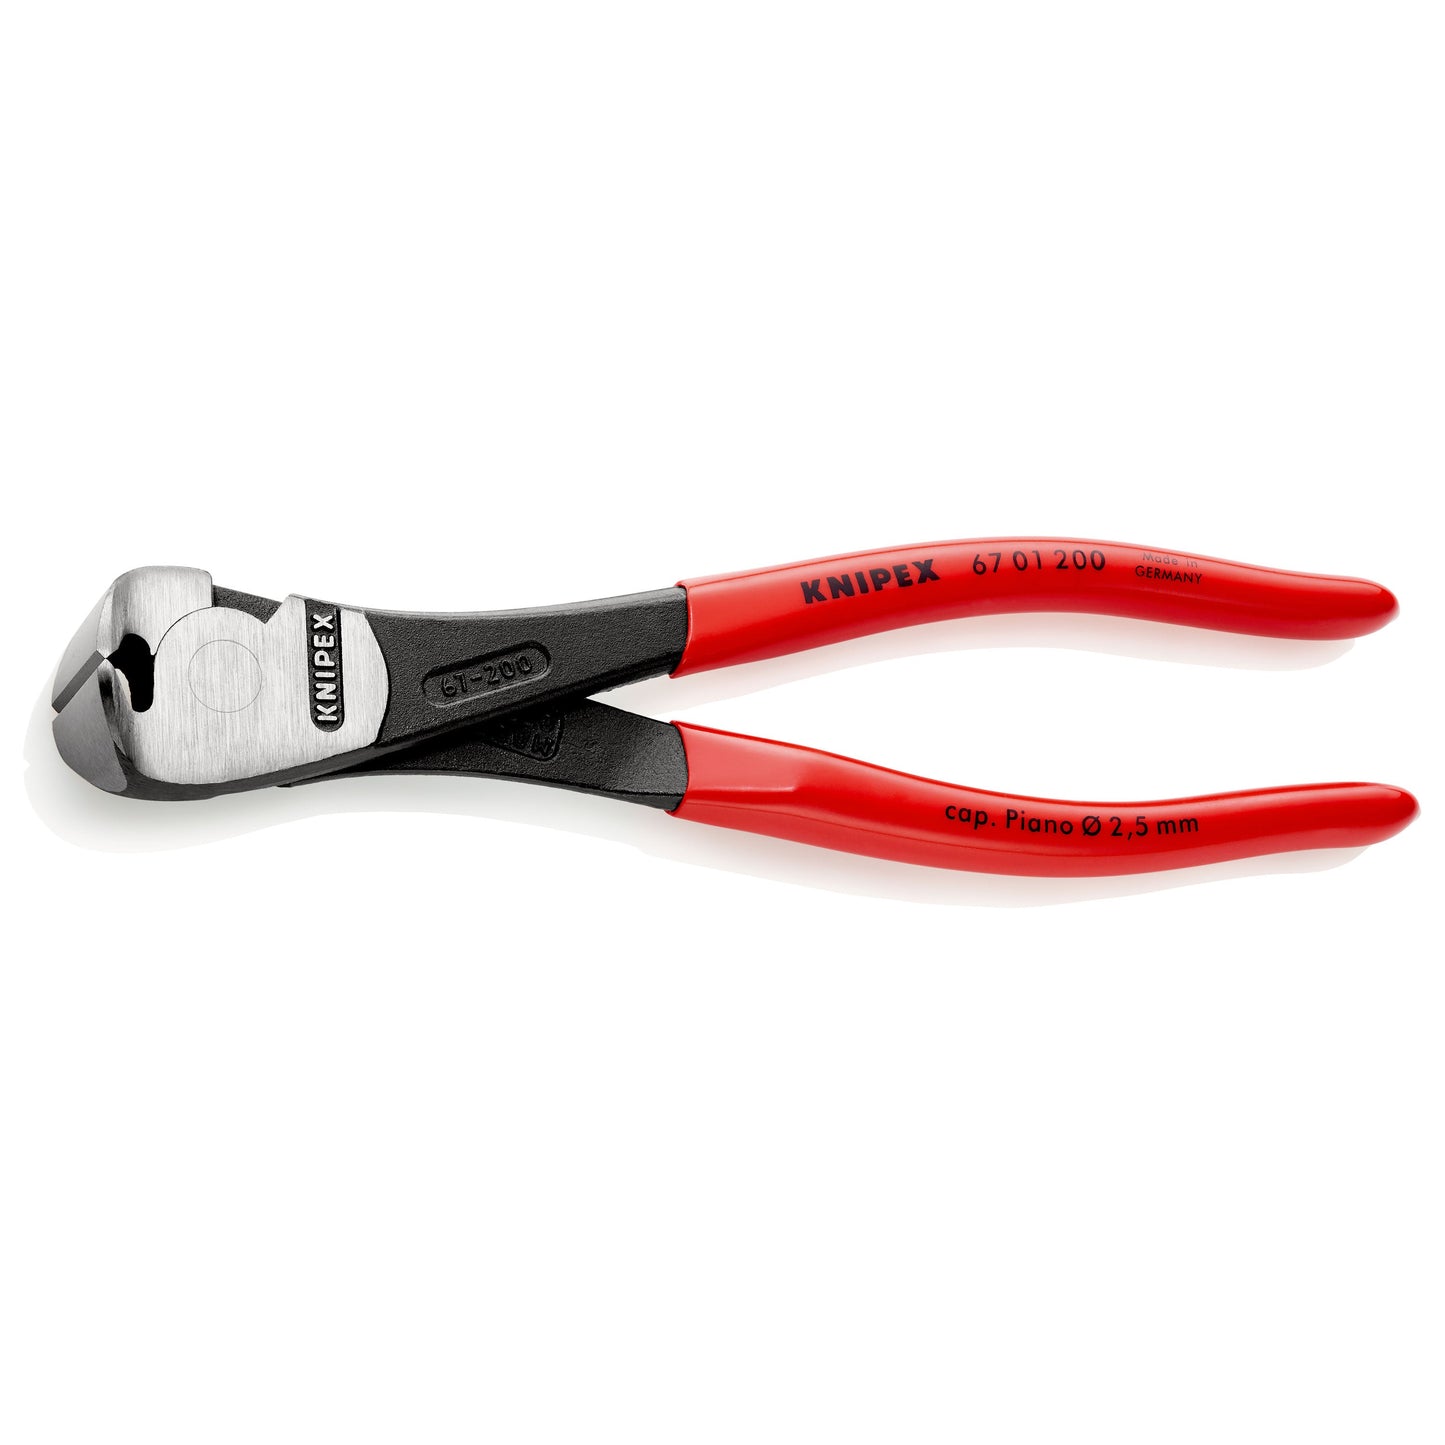 Knipex 67 01 200 - 200 mm force front cutting pliers with PVC handles